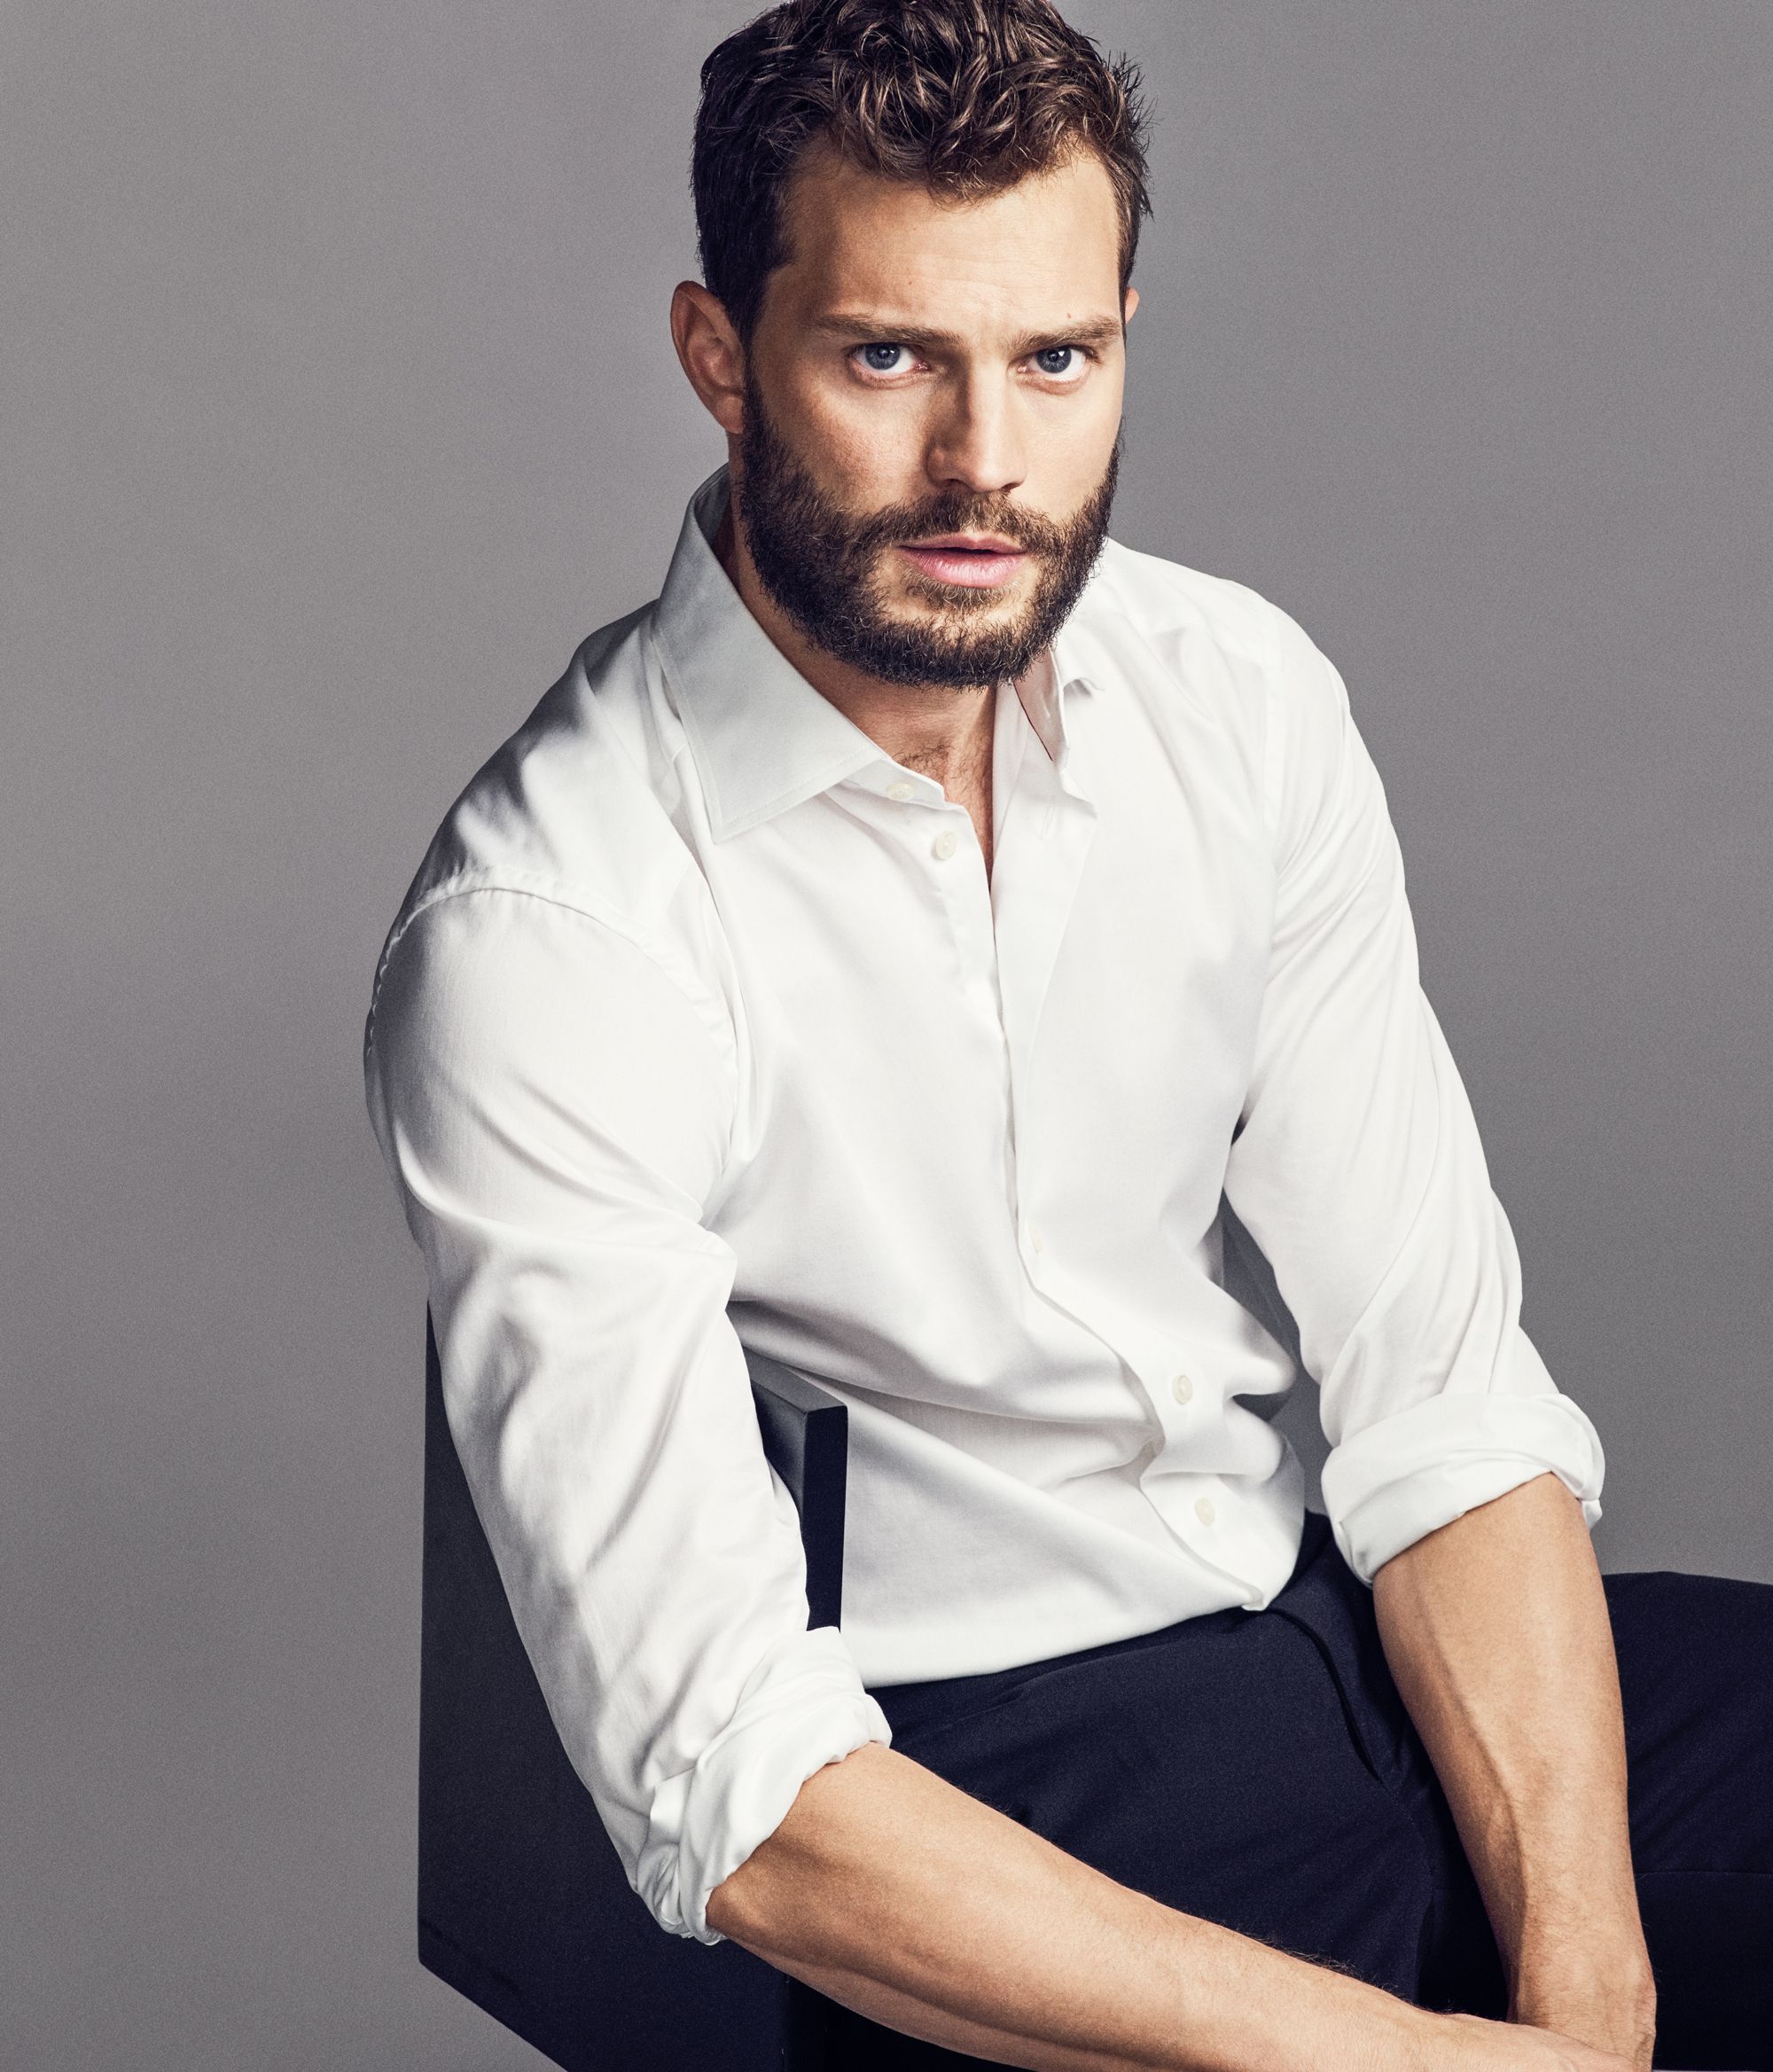 Fifty Shades Star Jamie Dornan Talks Stripping Down and Reading Up